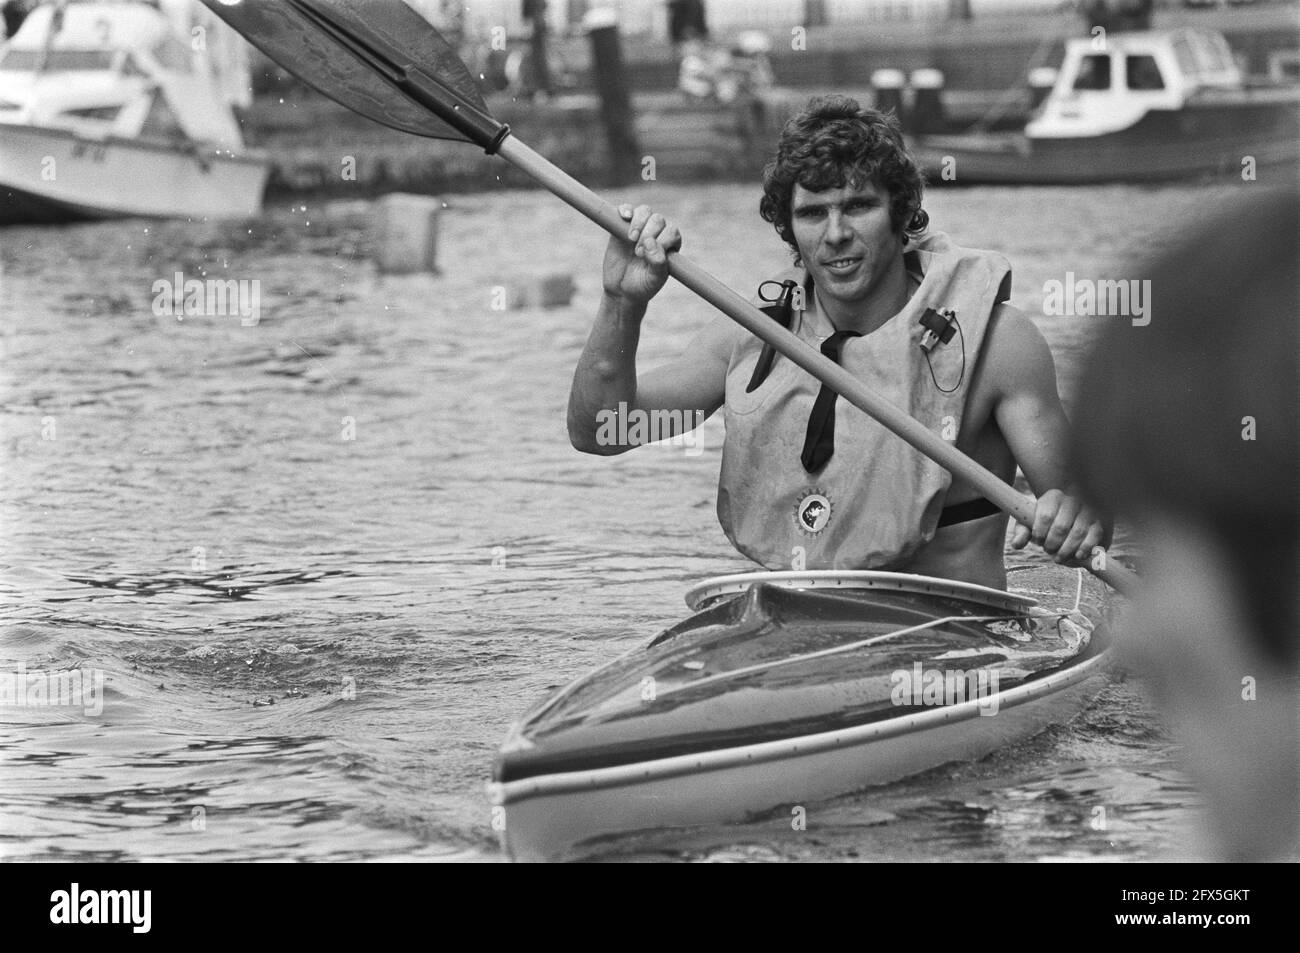 Recordings Superstar by the AVRO in Vlaardingen, Willem van Hanegem during canoeing, 4 August 1976, canoes, The Netherlands, 20th century press agency photo, news to remember, documentary, historic photography 1945-1990, visual stories, human history of the Twentieth Century, capturing moments in time Stock Photo